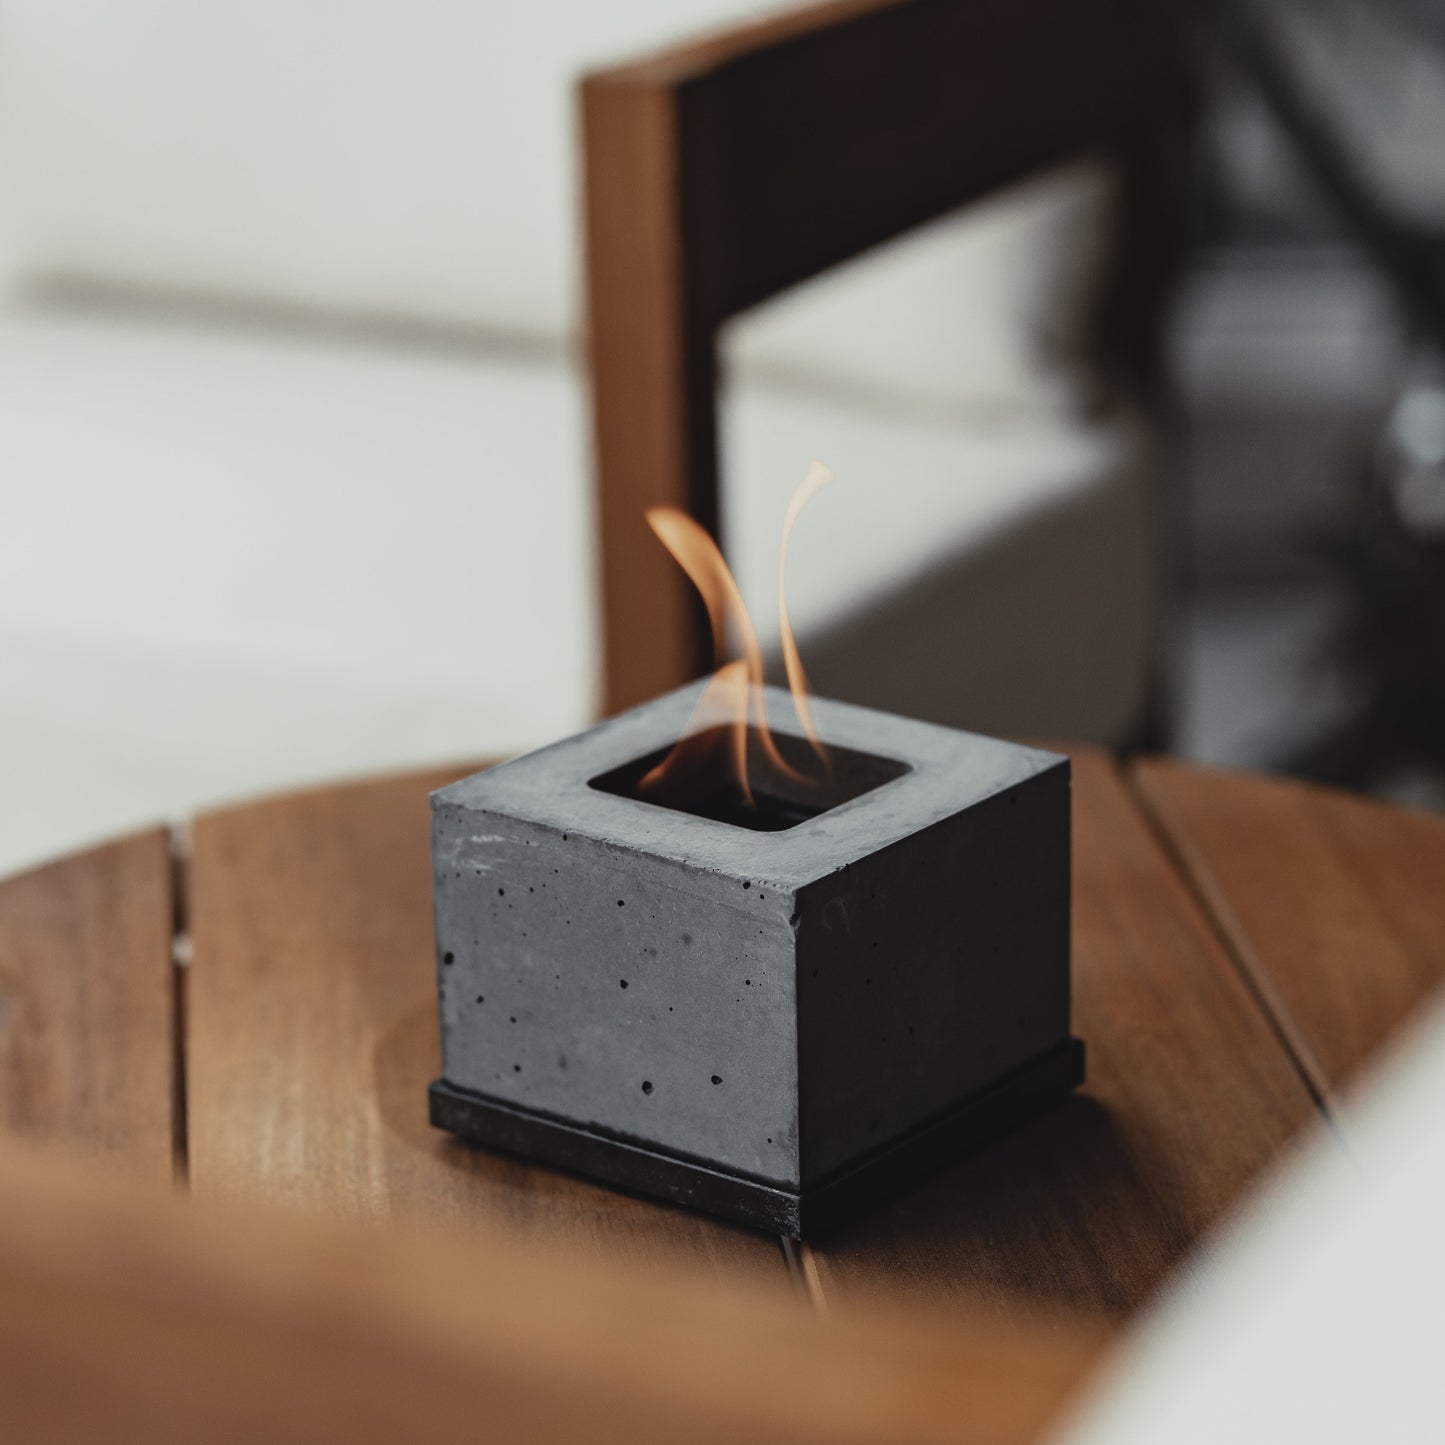 Square Personal Fireplace by FLÎKR Fire